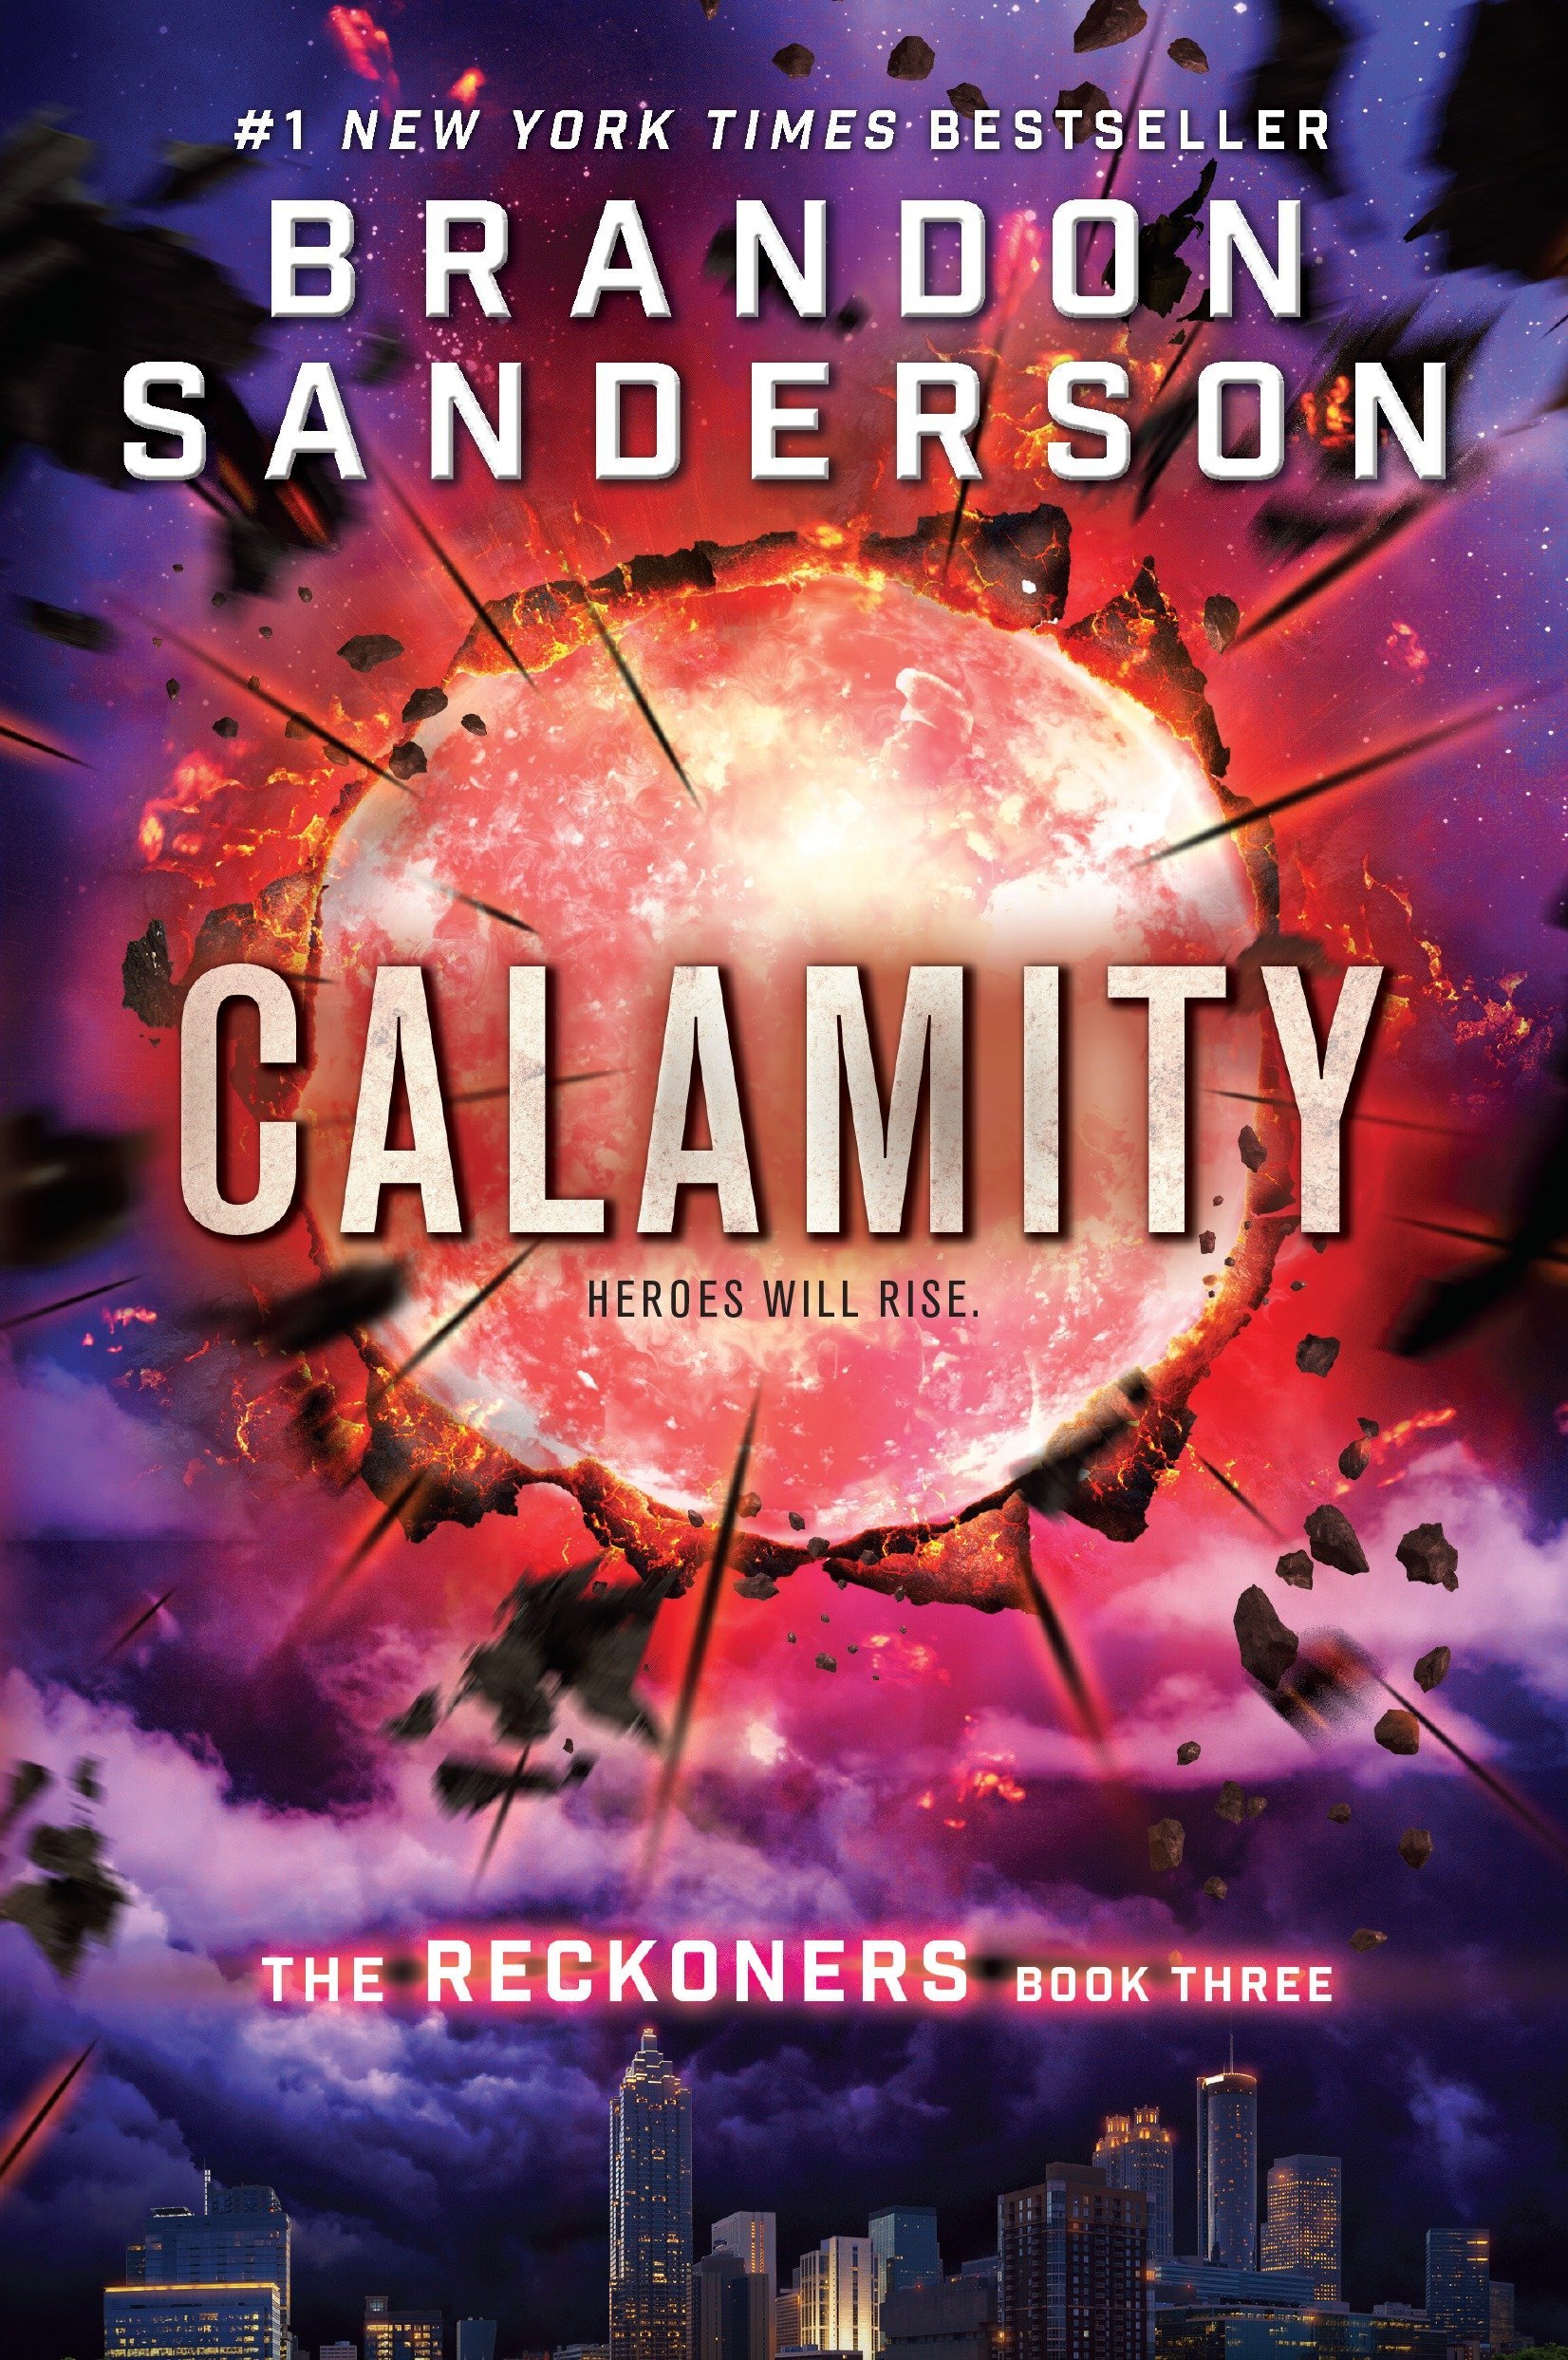 Book Cover Calamity (The Reckoners)